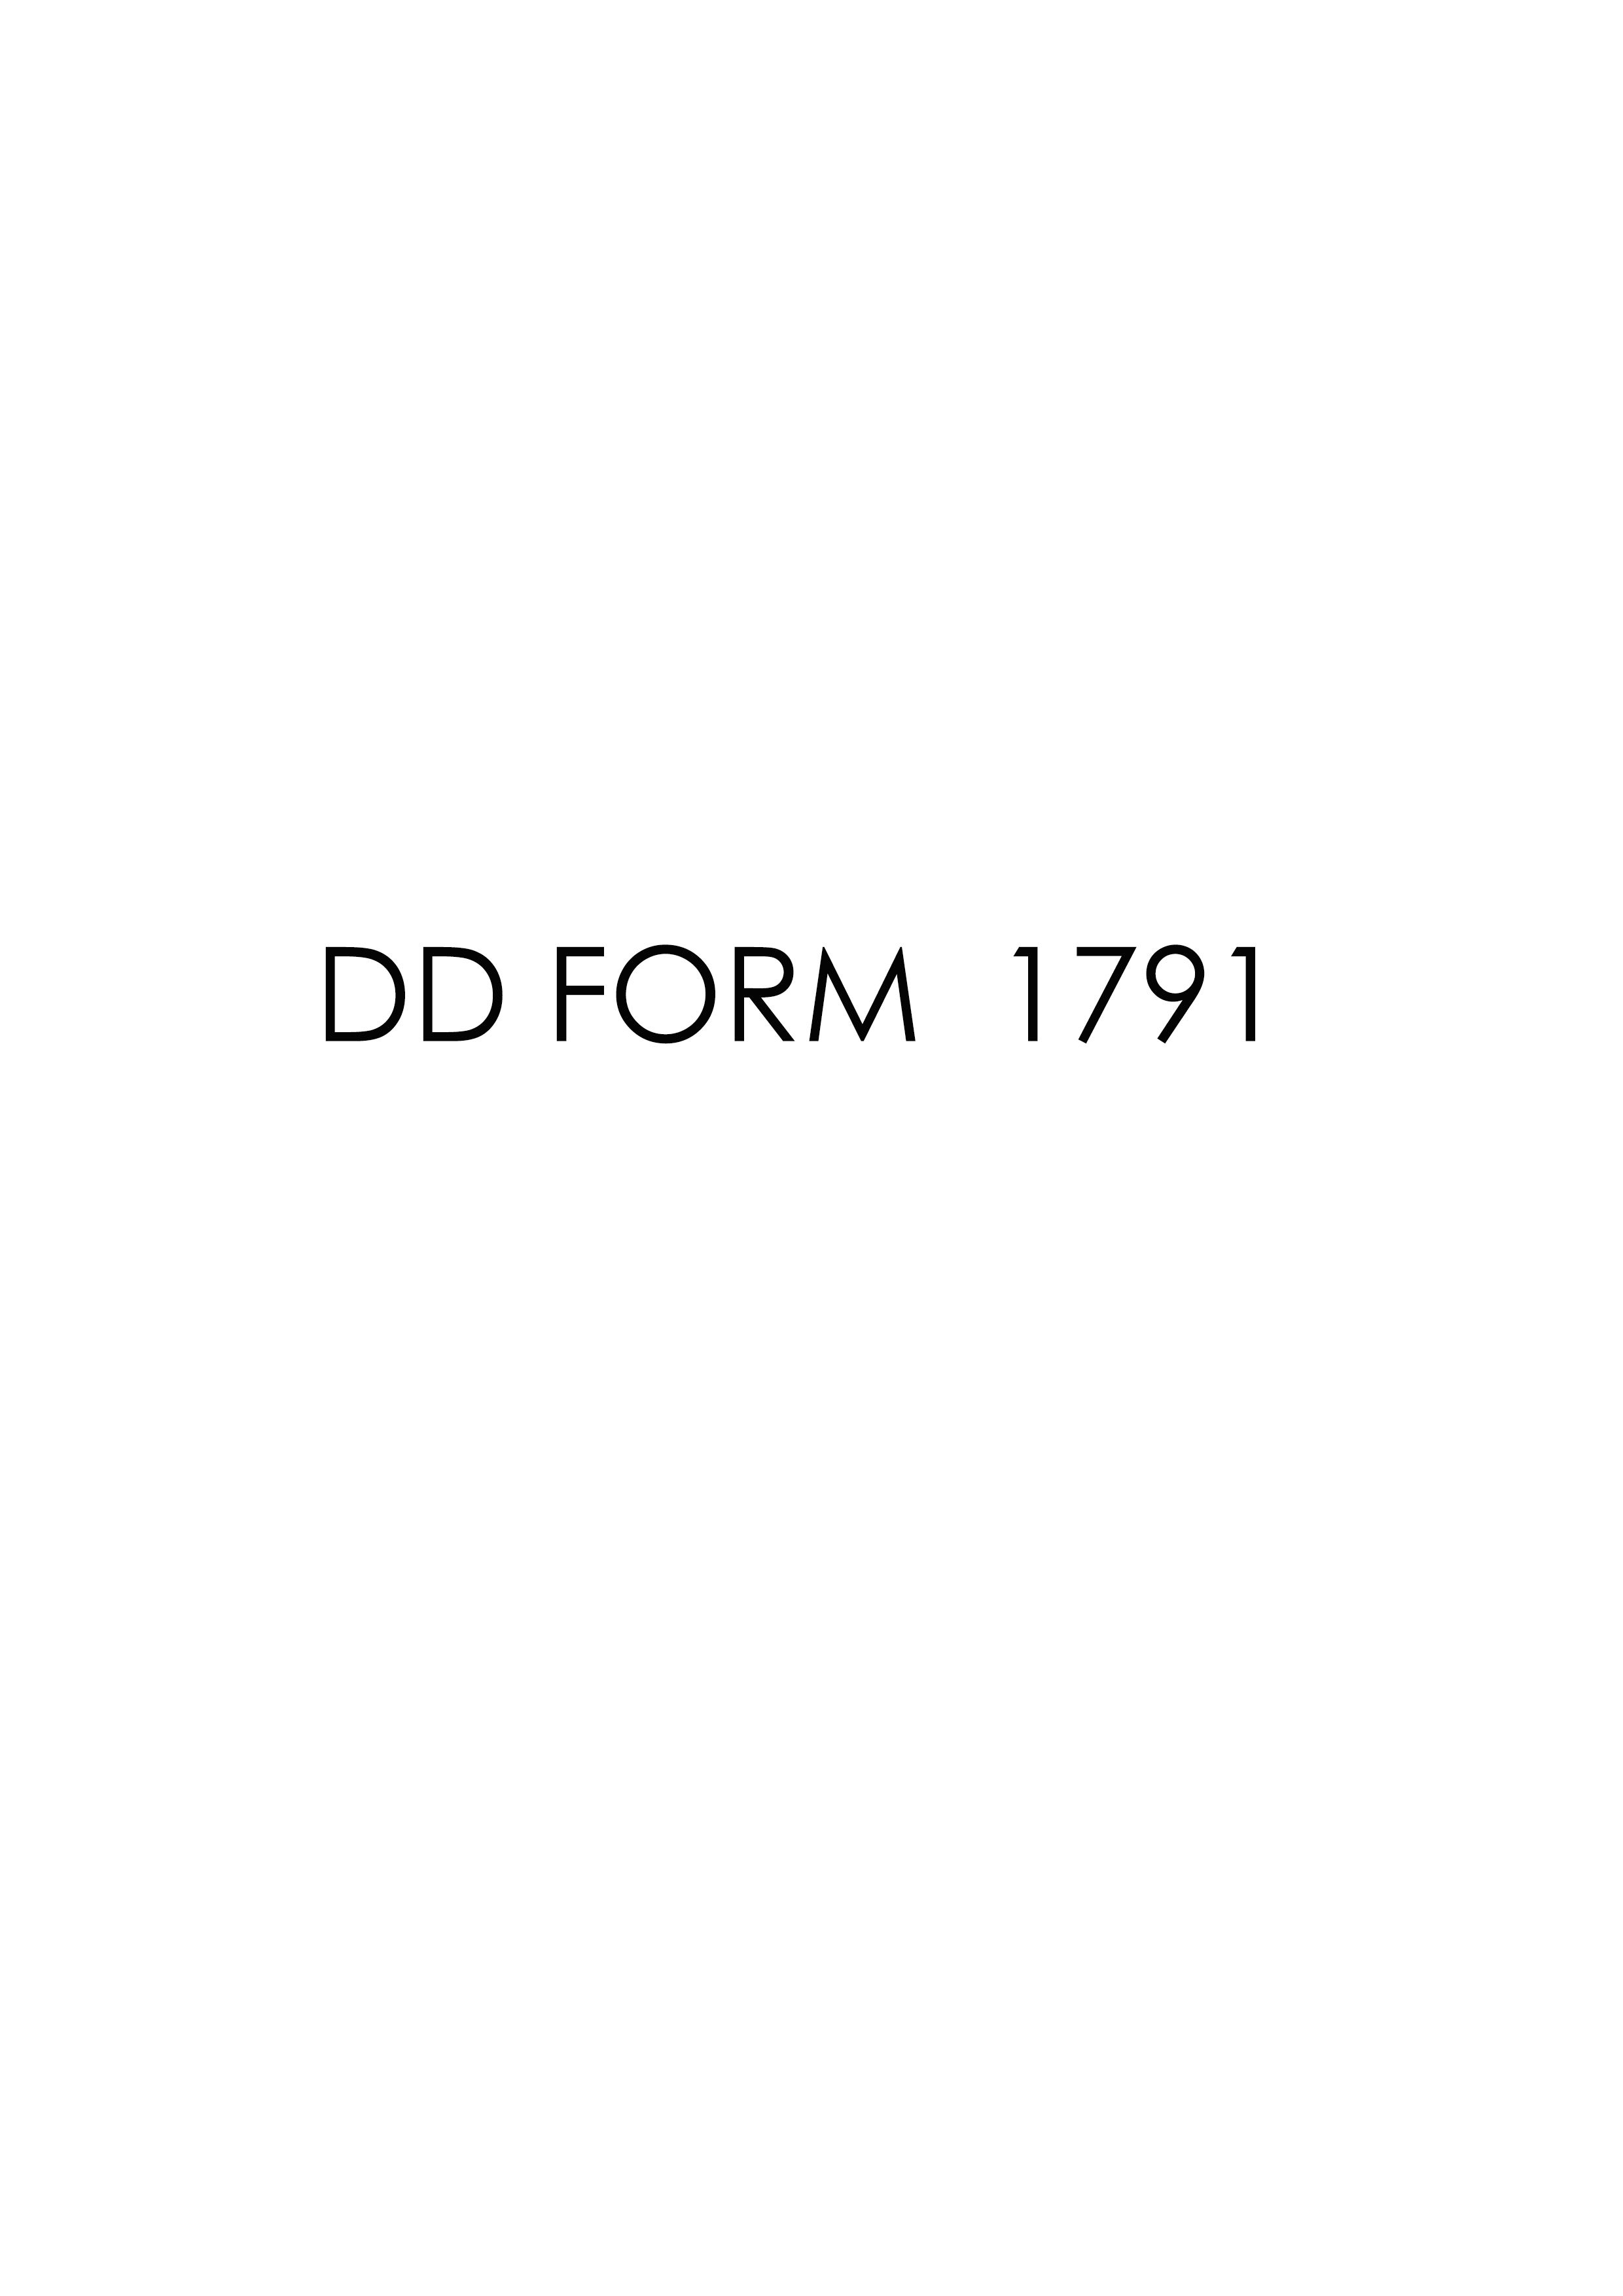 Download Fillable dd Form 1791